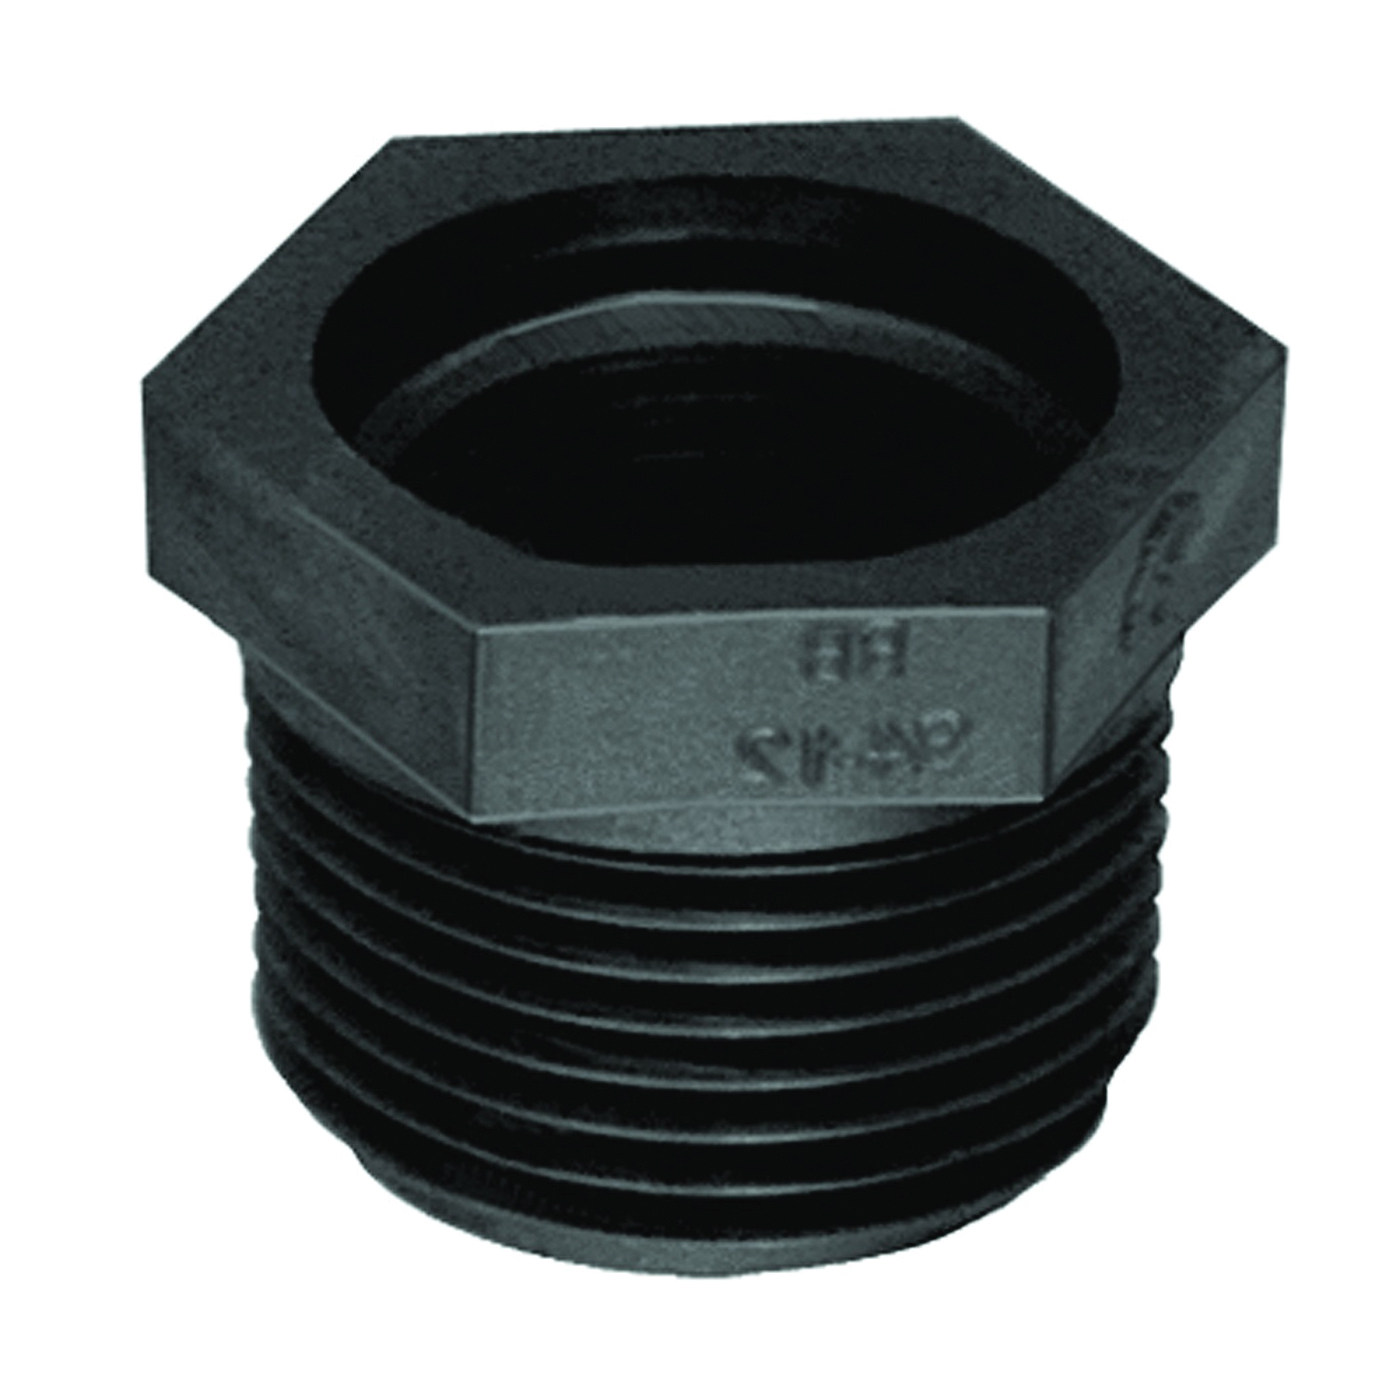 RB112-114P Reducing Pipe Bushing, 1-1/2 x 1-1/4 in, MPT x FPT, Black